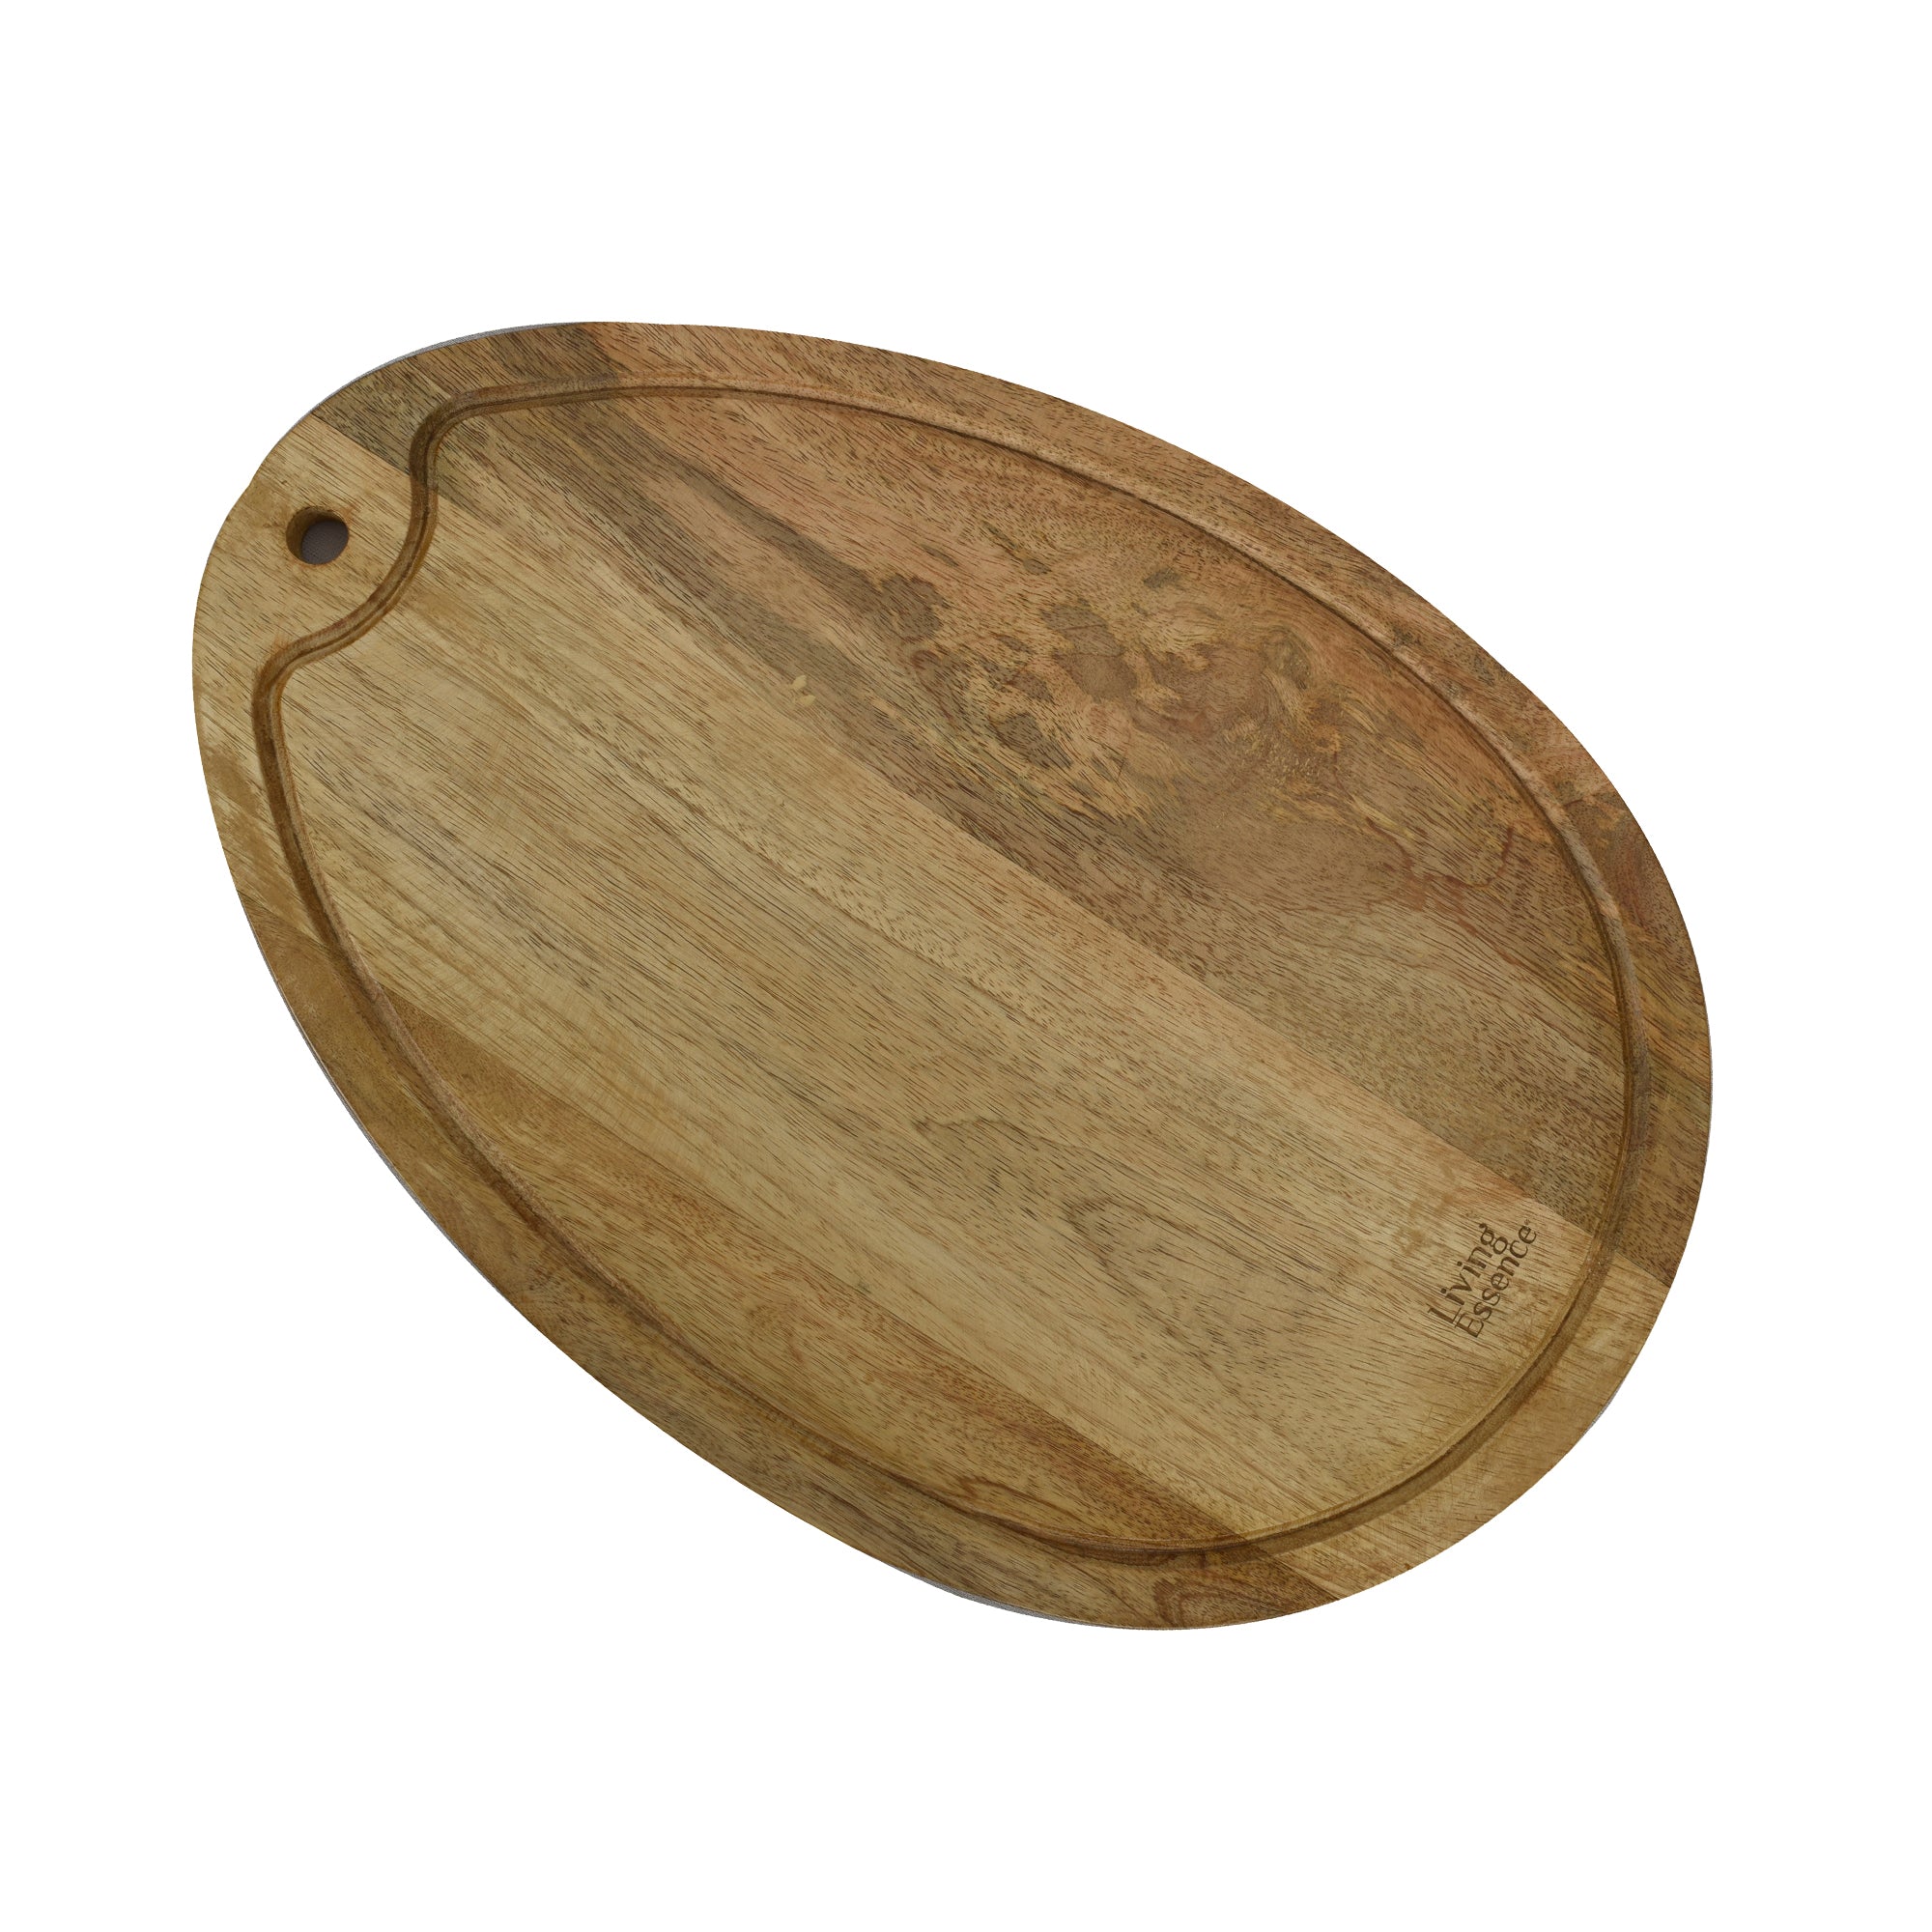 Aachman Wooden Oval Grooved Platter Cheese Board 17.5 inches